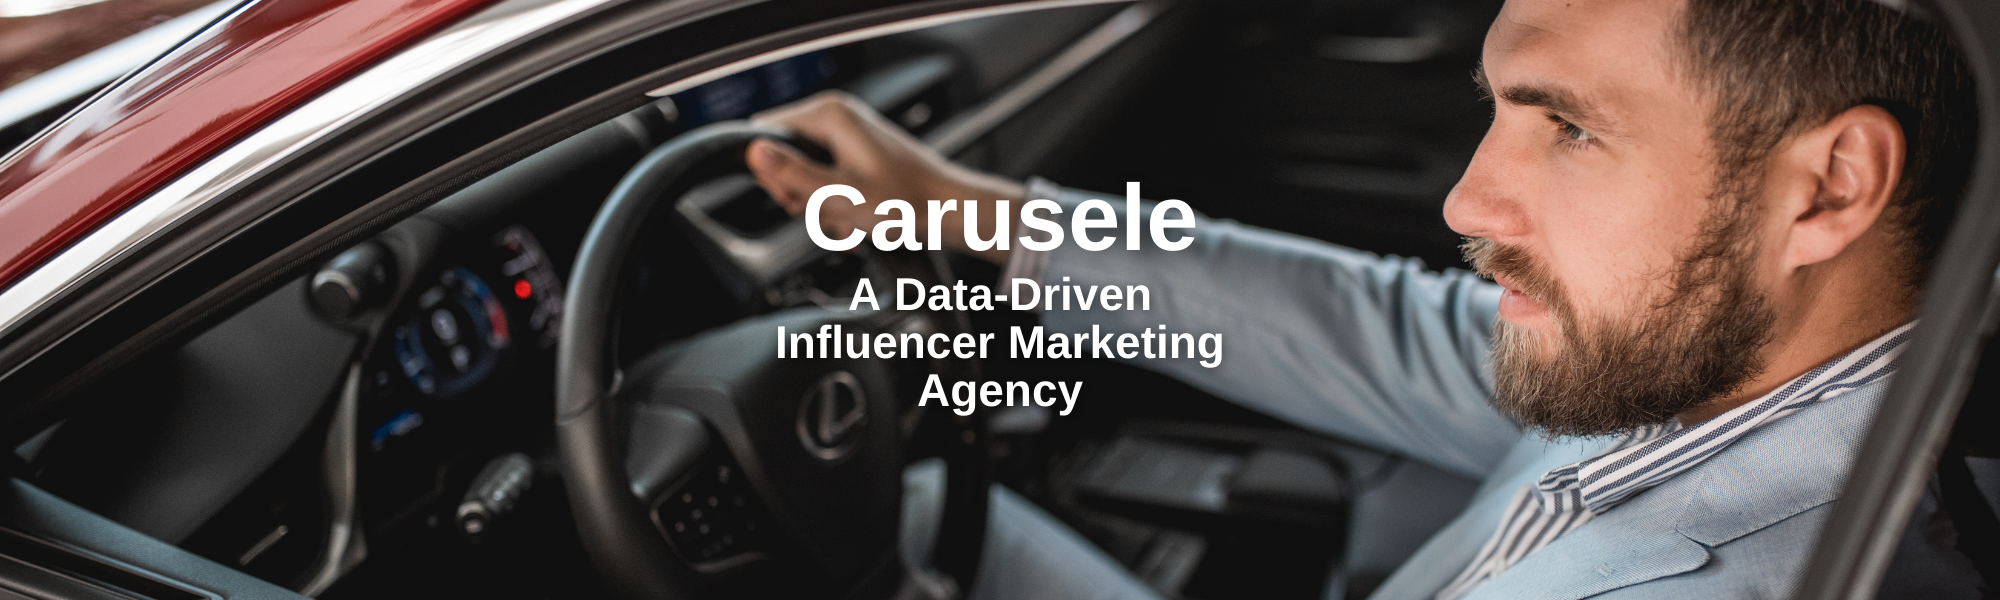 Carusele | A Data-Driven Influencer Marketing Agency